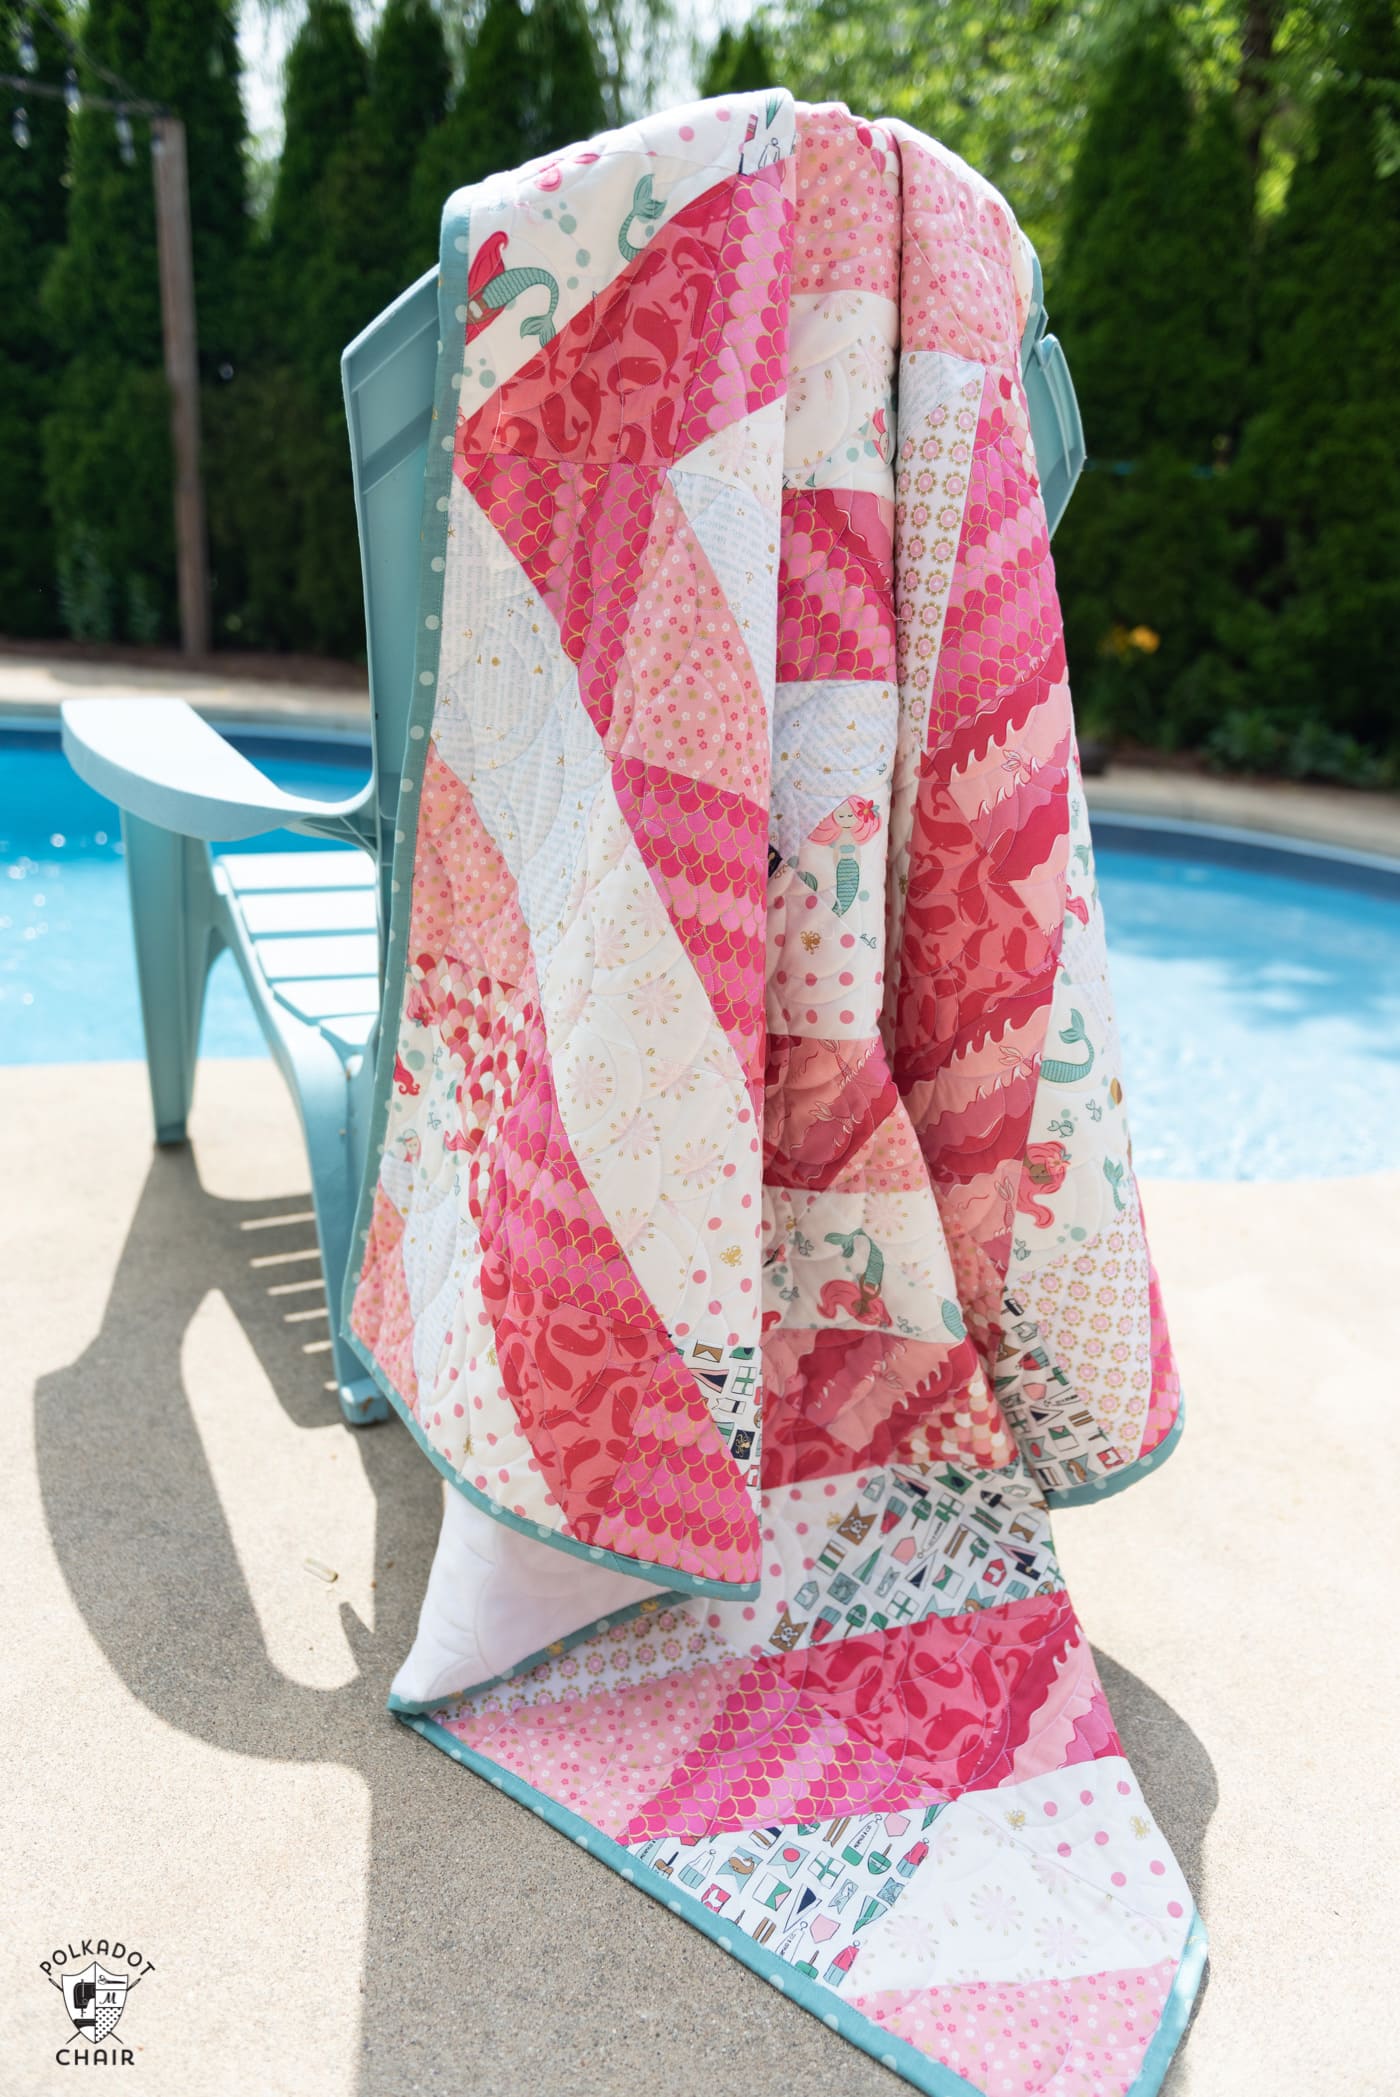 coral and white quilt draped over chair by pool